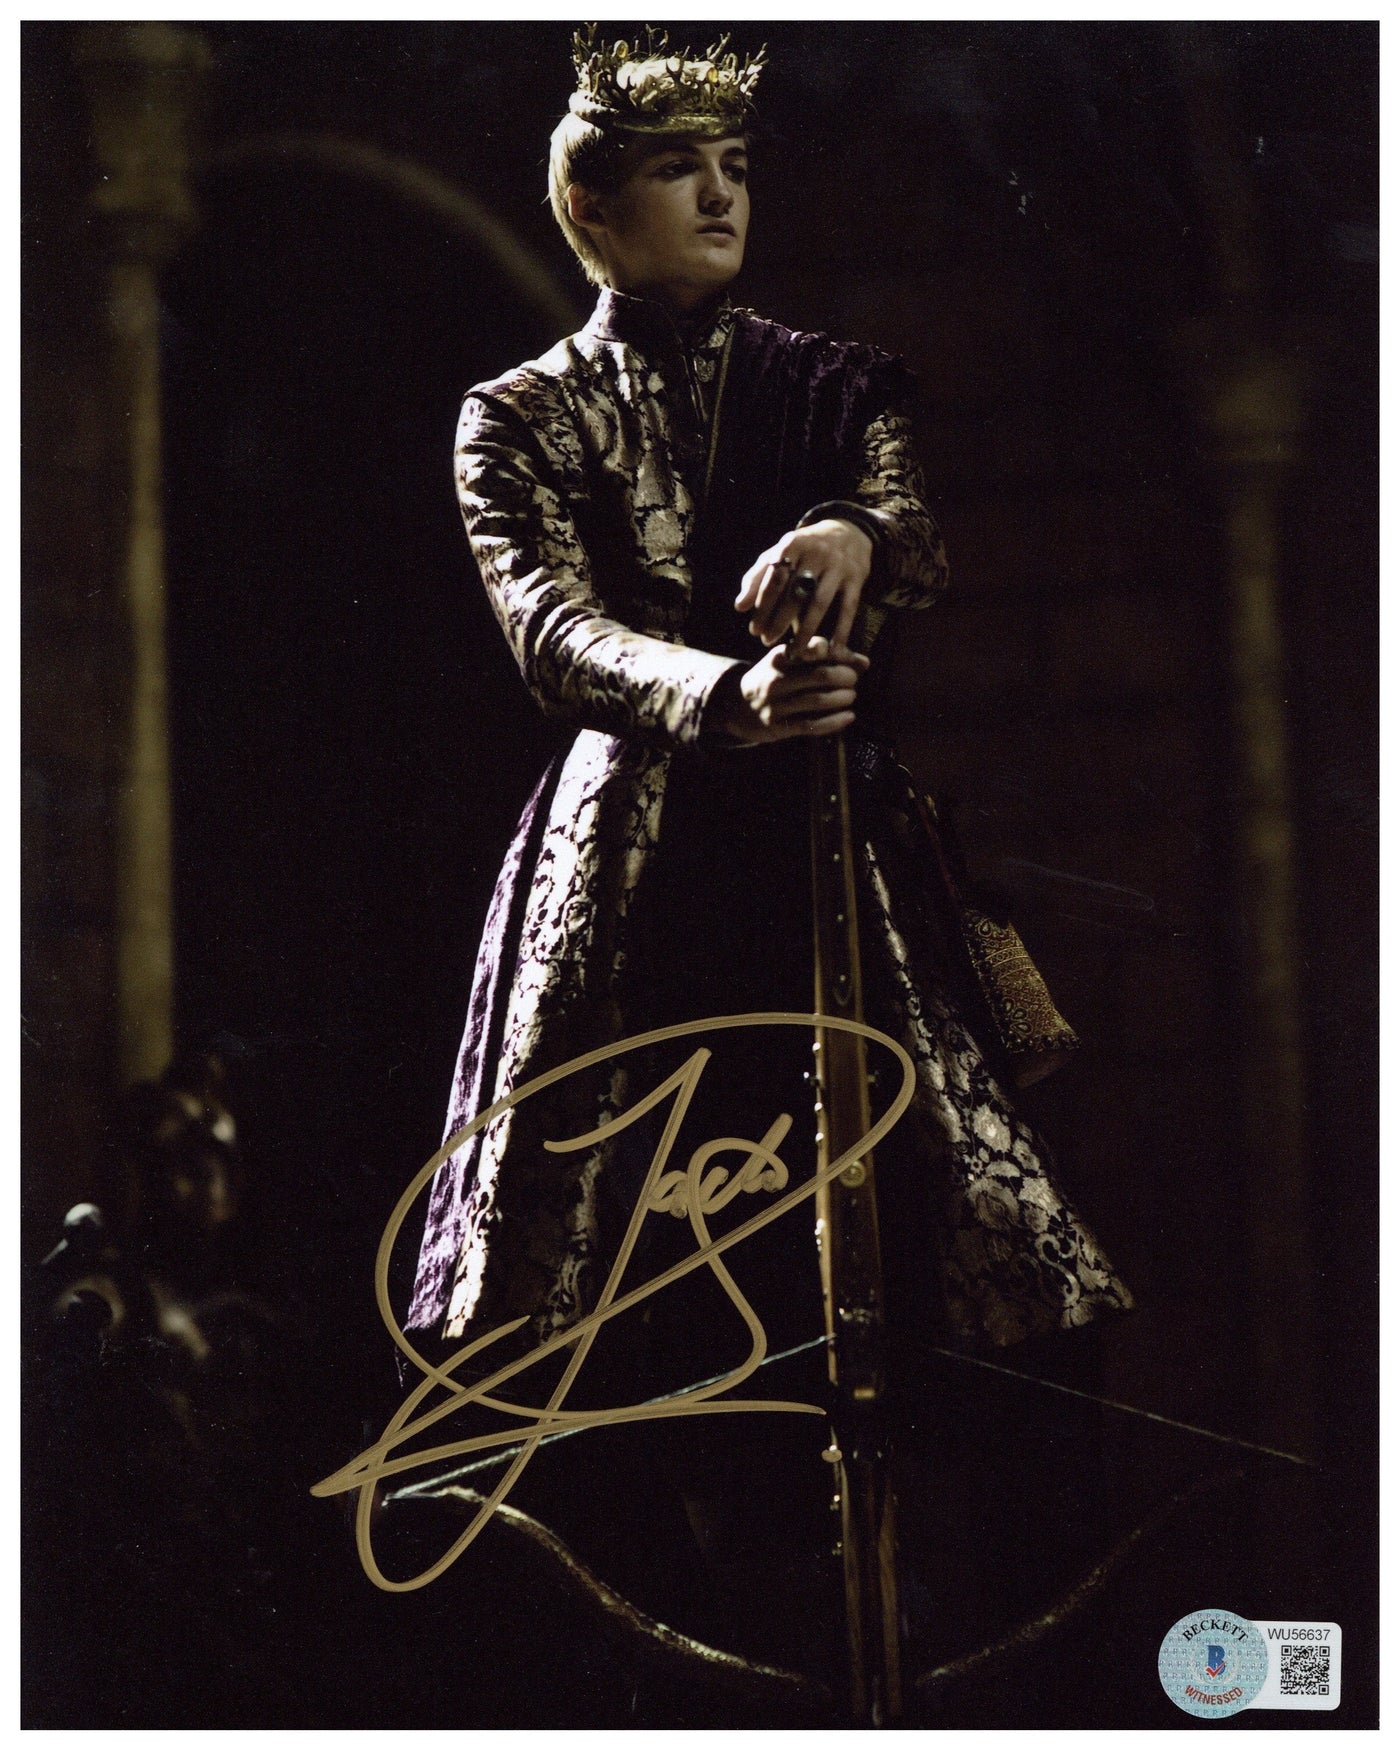 JACK GLEESON SIGNED 8X10 PHOTO GAME OF THRONES JOFFREY AUTOGRAPHED BAS 4